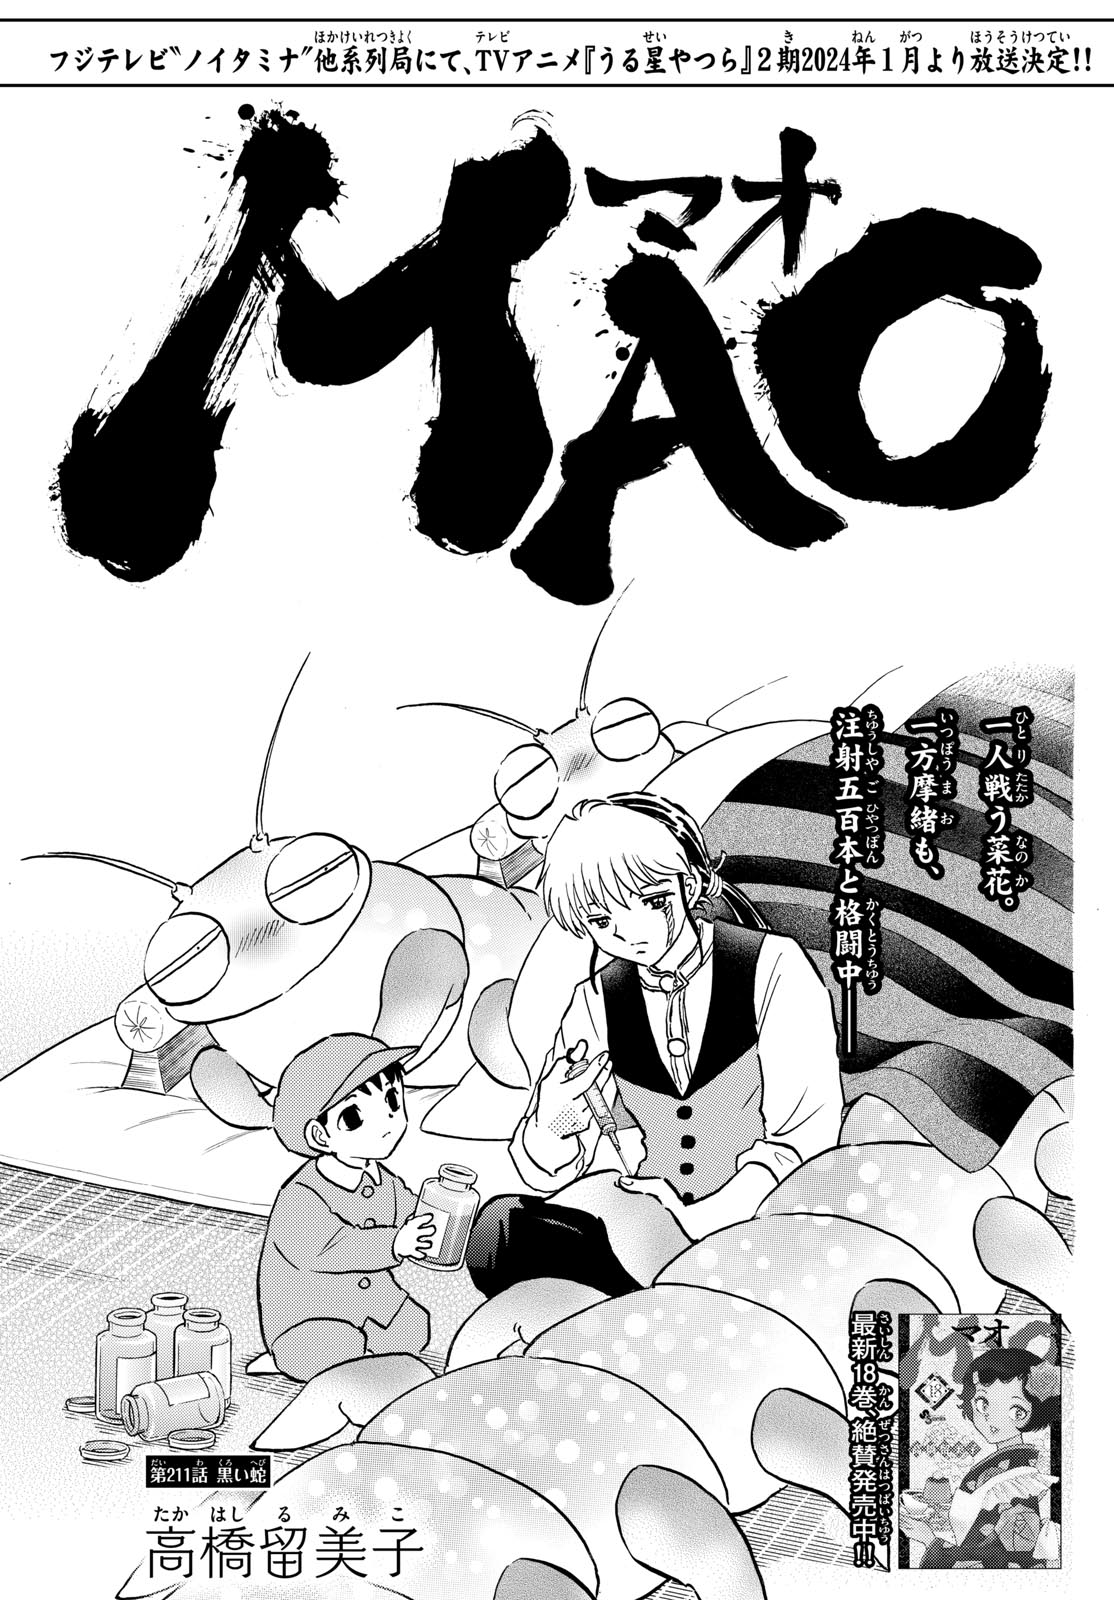 MAO - Chapter 211 - Page 1